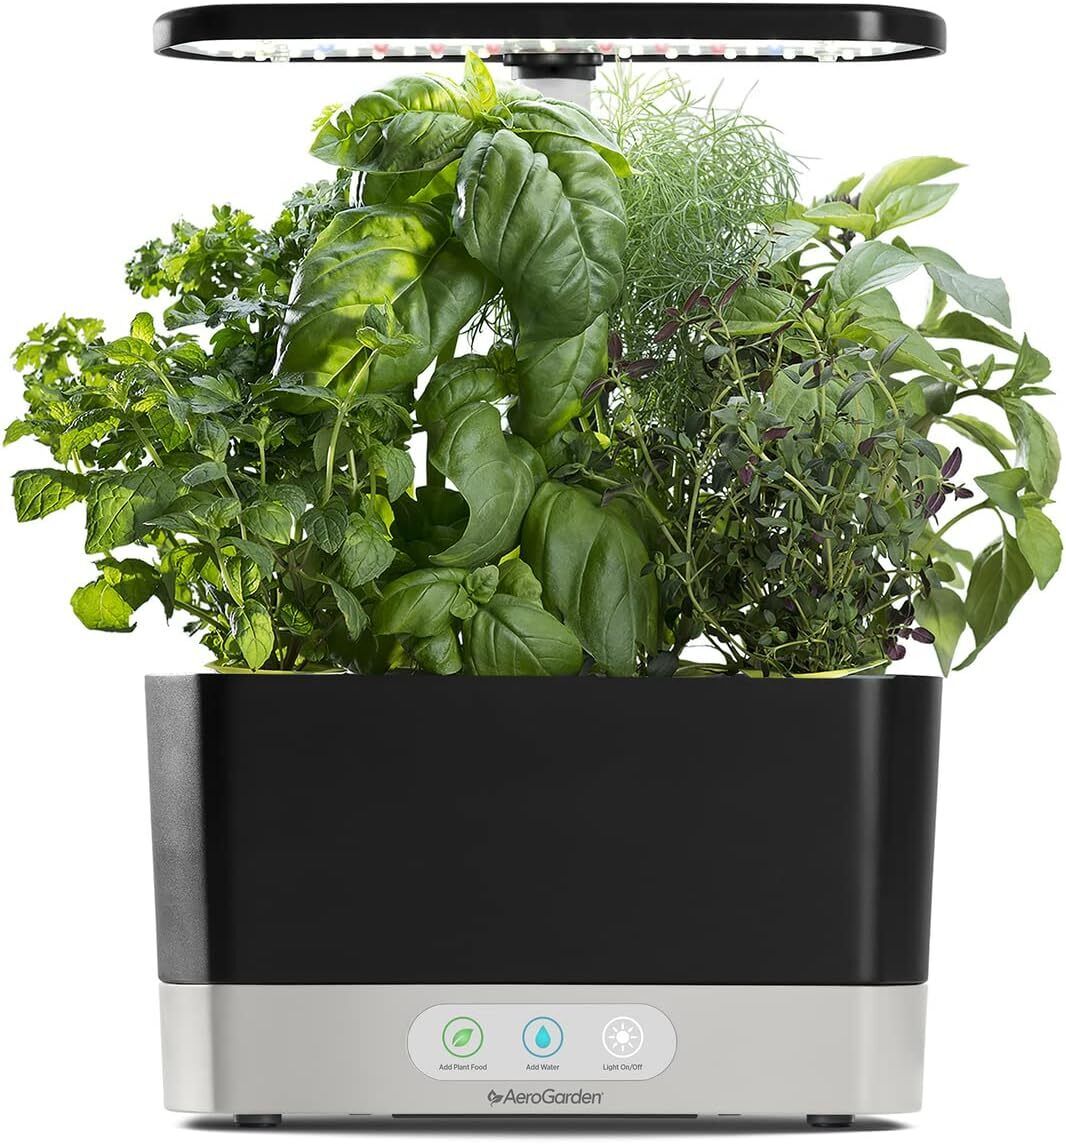 Harvest Indoor Garden Hydroponic System with LED Grow Light Herb Kit,6Pods,Black